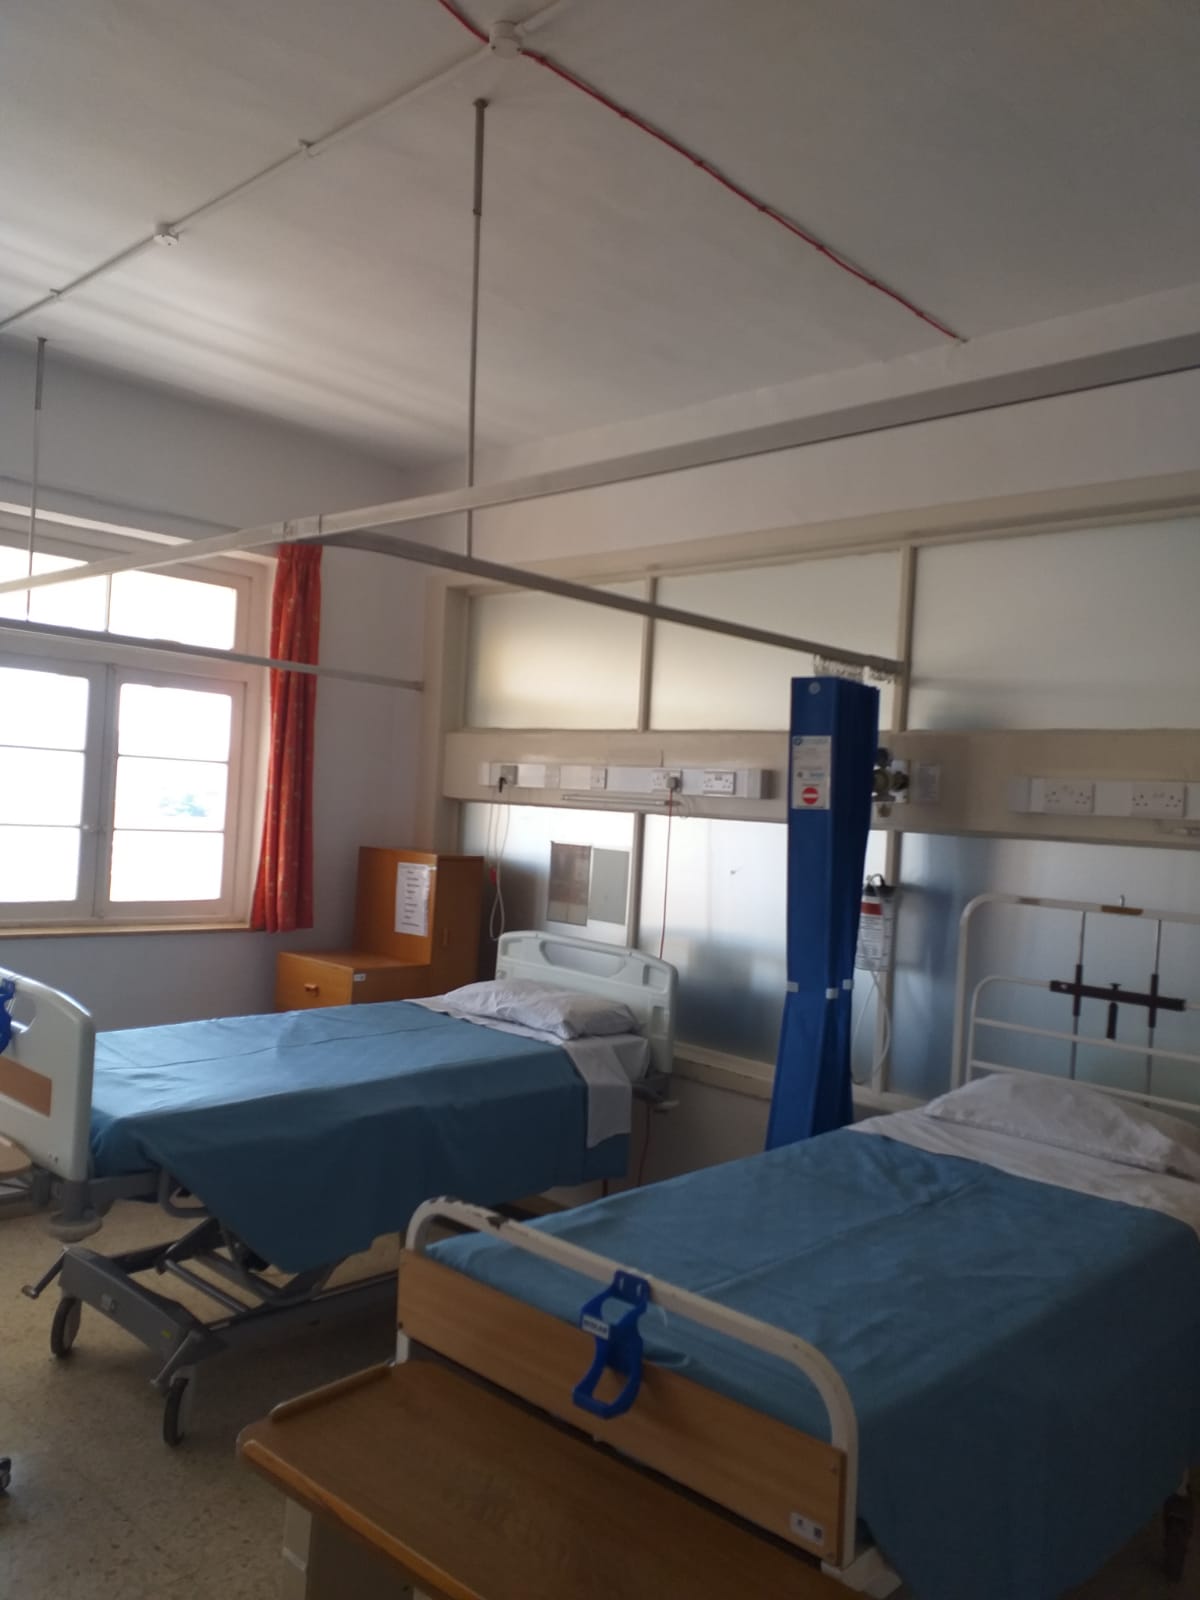 Beds in KGH